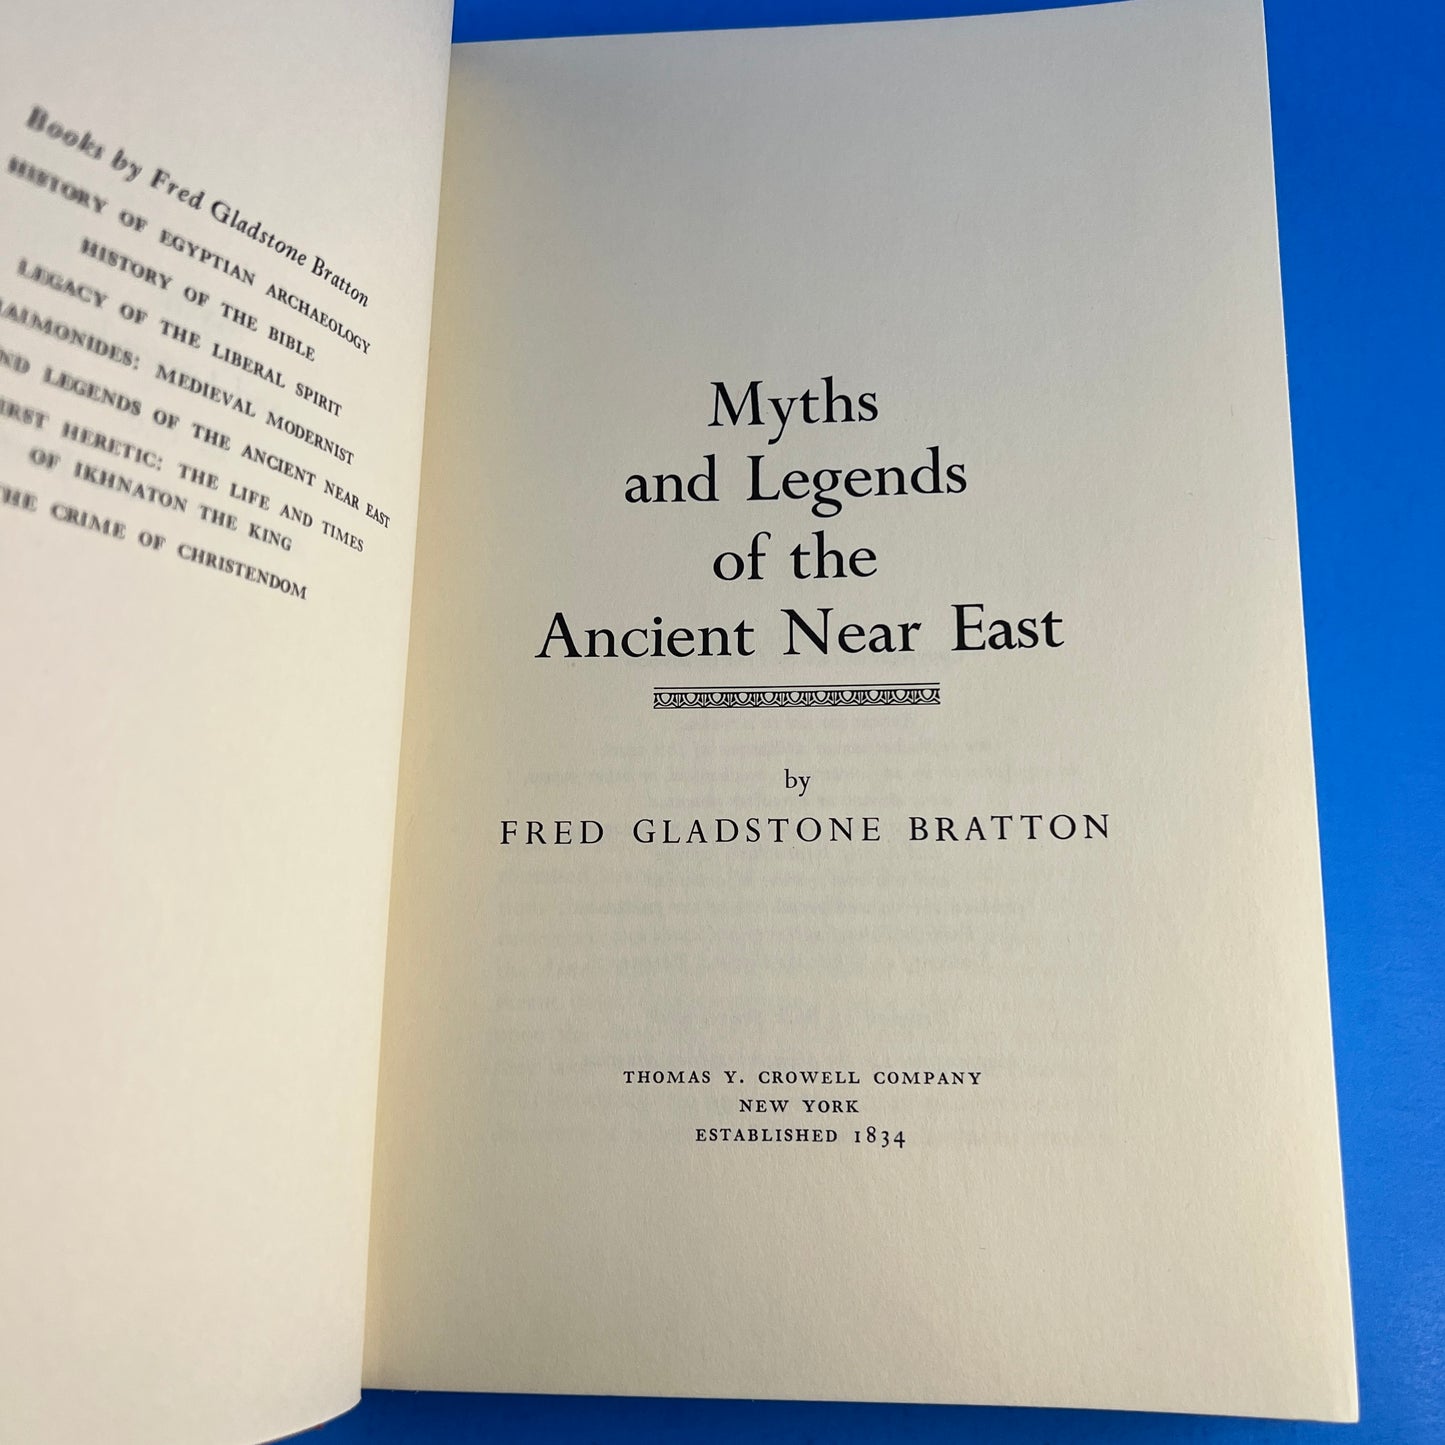 Myths and Legends of the Ancient Near East